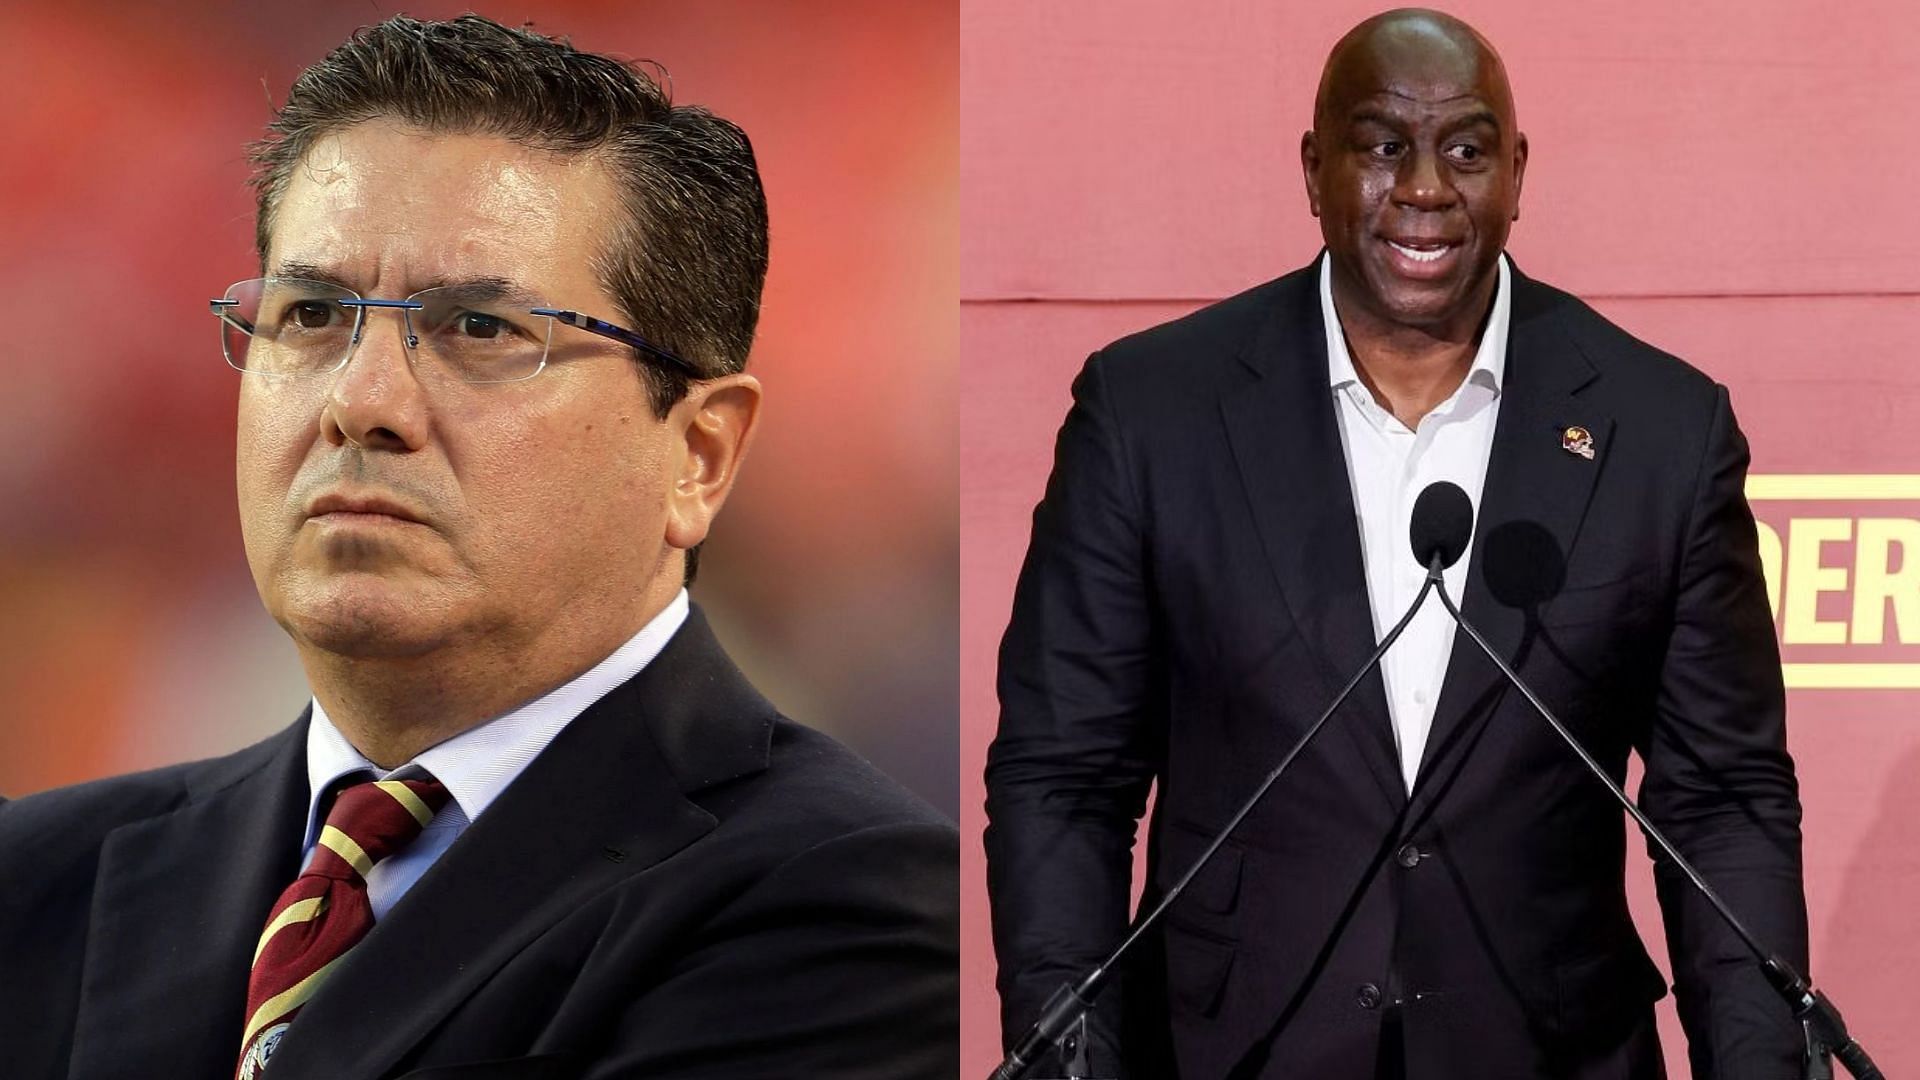 Dan Snyder (left) sold the Washington Commanders franchise to an ownership group that includes Magic Johnson (right) for $6.05 billion.